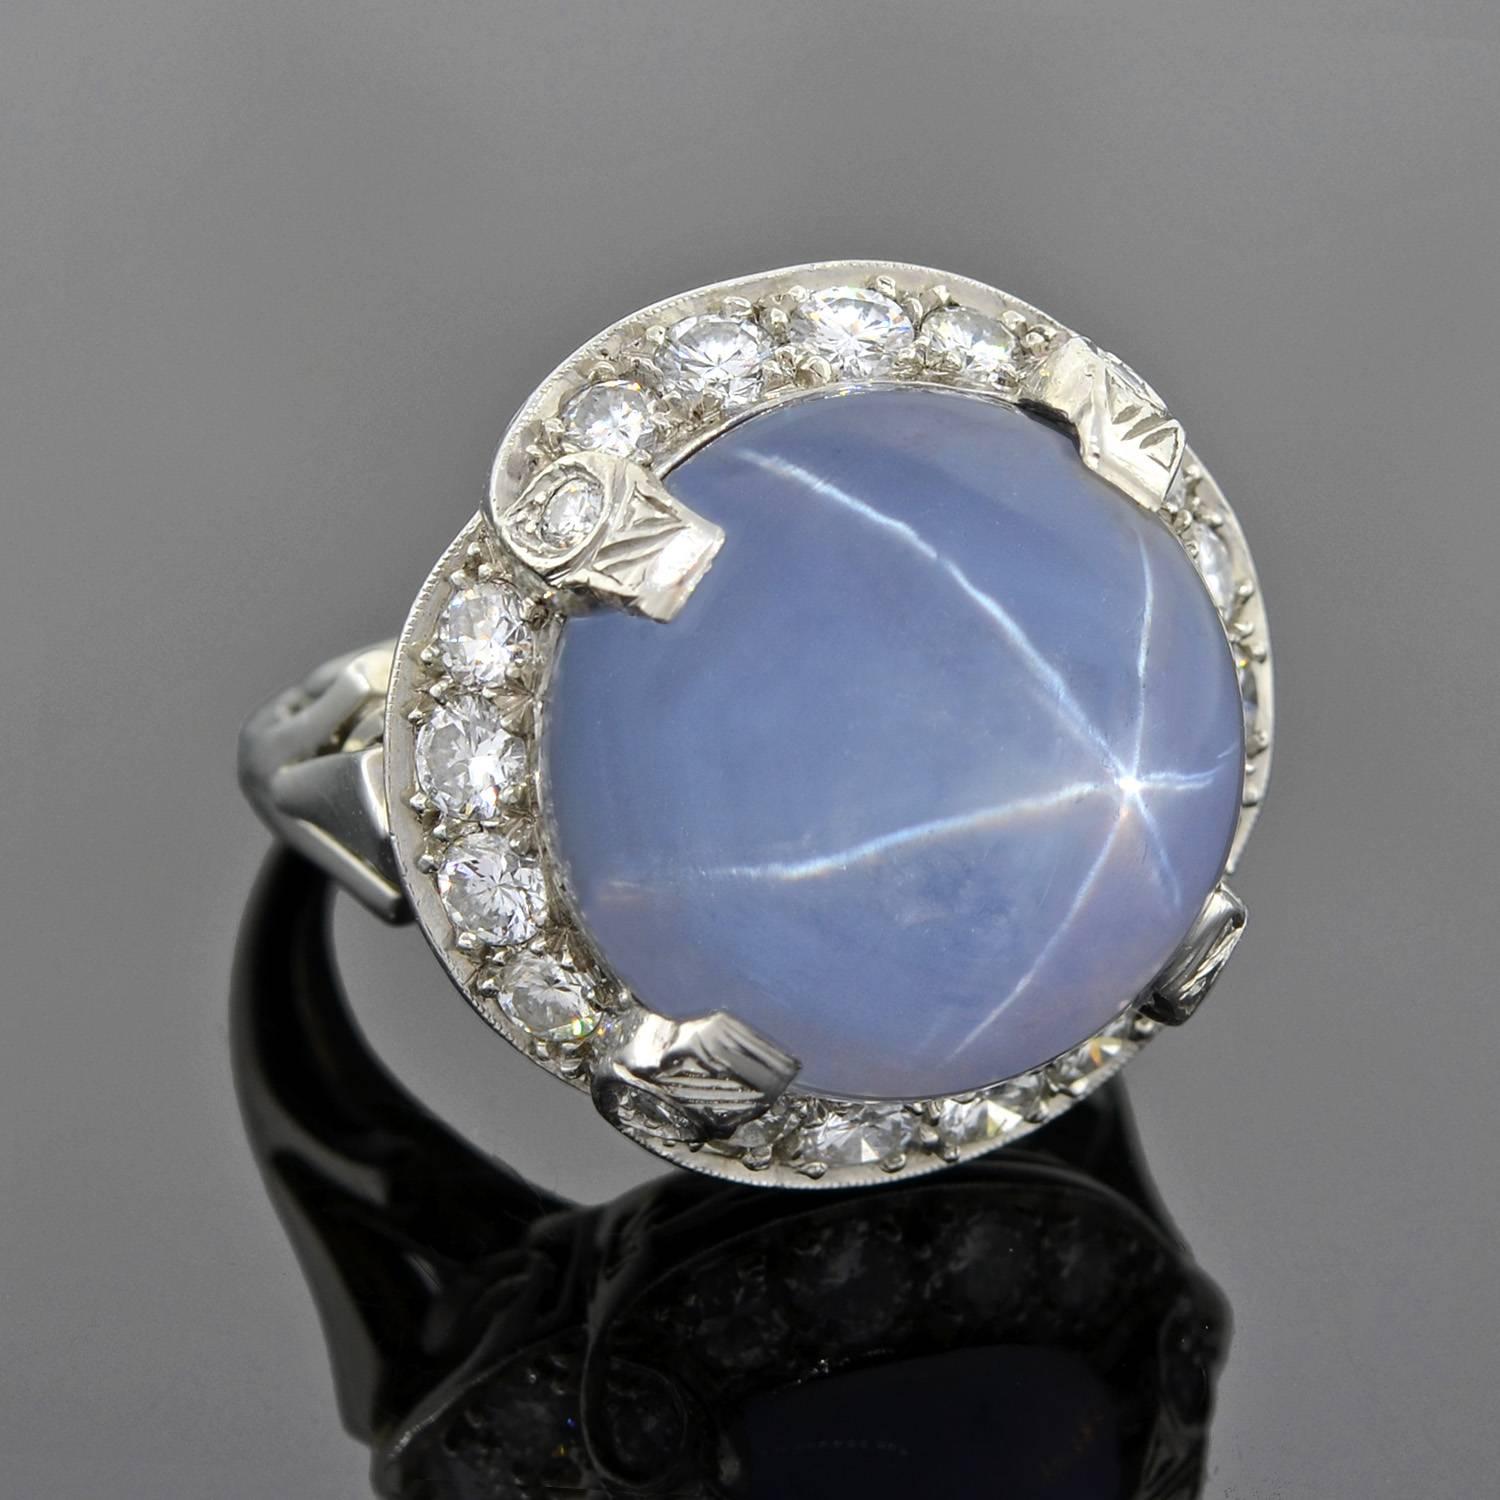 A simply stunning sapphire and diamond cocktail ring from the Late Art Deco (ca1935) era! This fantastic piece has a large, natural star sapphire center that is a round cabochon shape. The stone weighs approximately 12ct+ and has a wonderful, rich